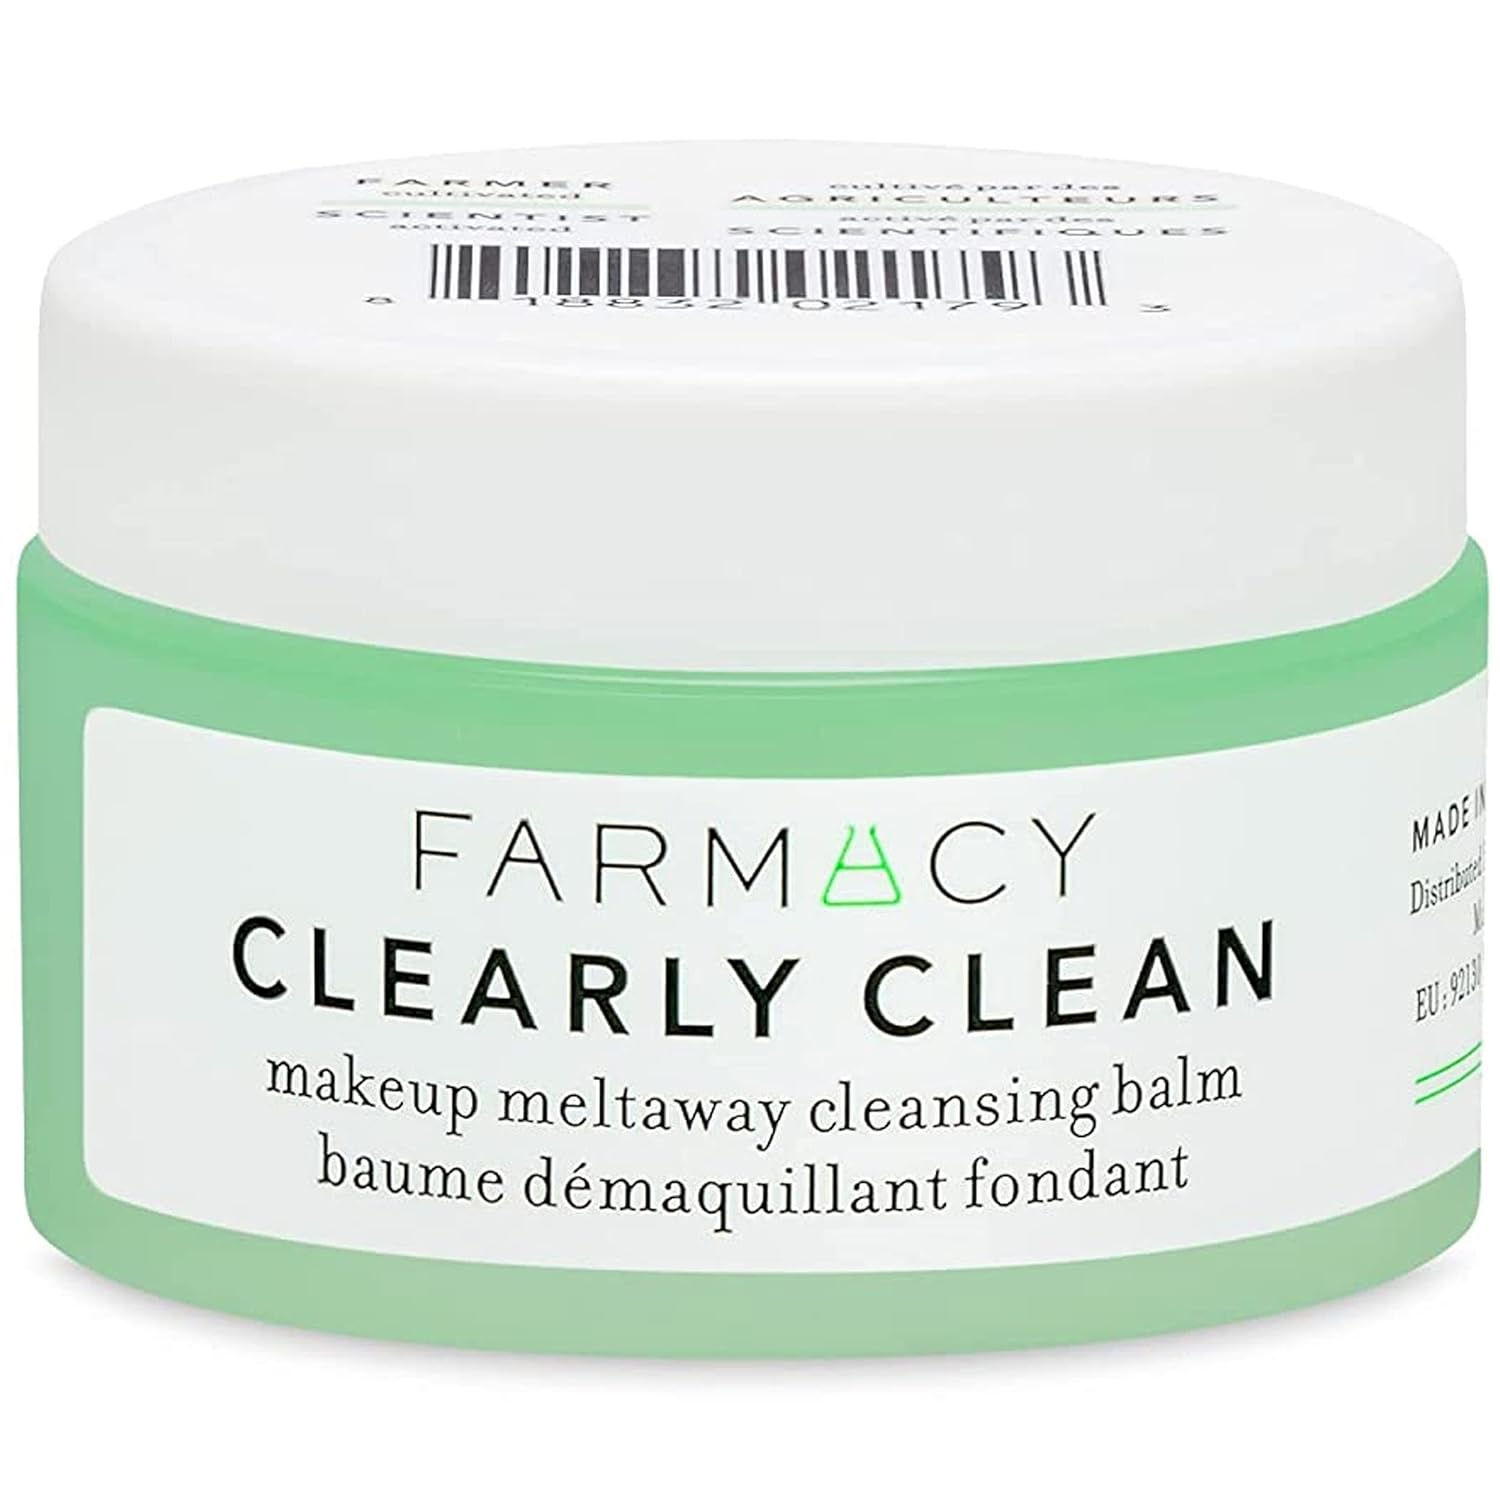 Farmacy Makeup Remover Cleansing Balm - Clearly Clean Fragrance-Free Makeup Melting Balm - Great Balm Cleanser for Sensitive Skin (12ml)